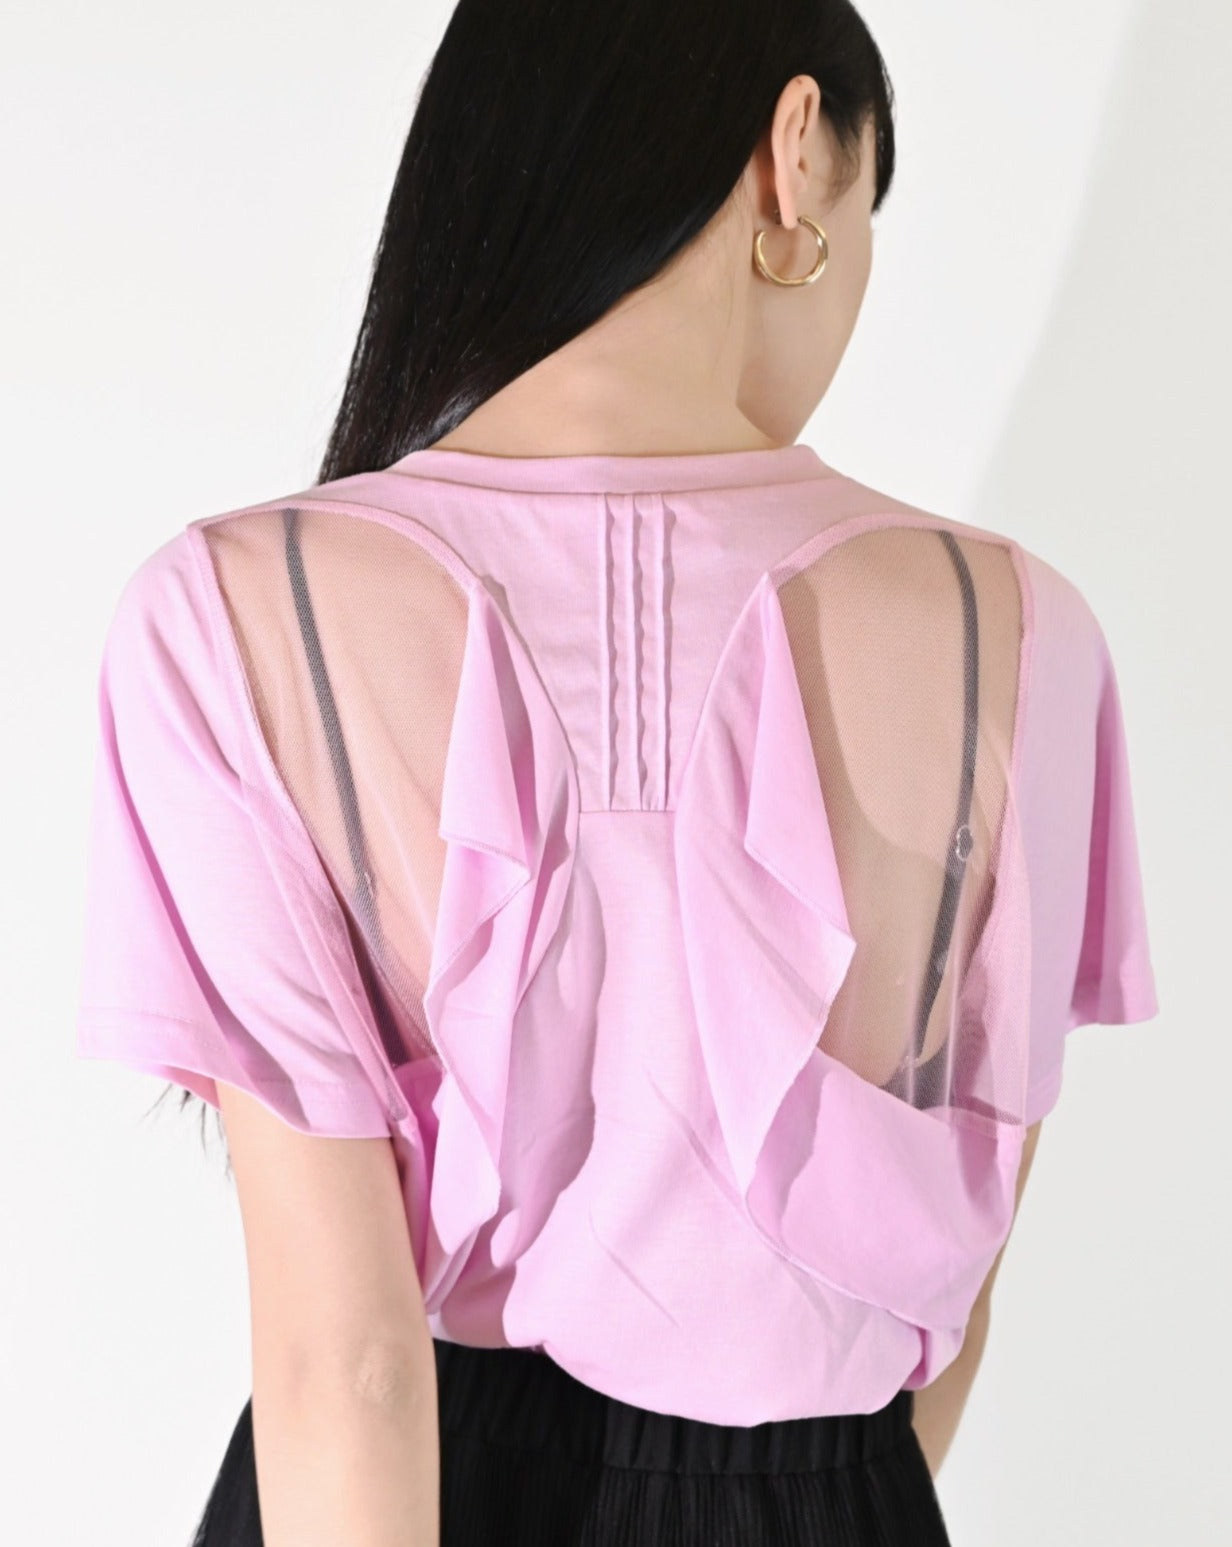 aalis ADDYSON racer back mesh top (Pink)